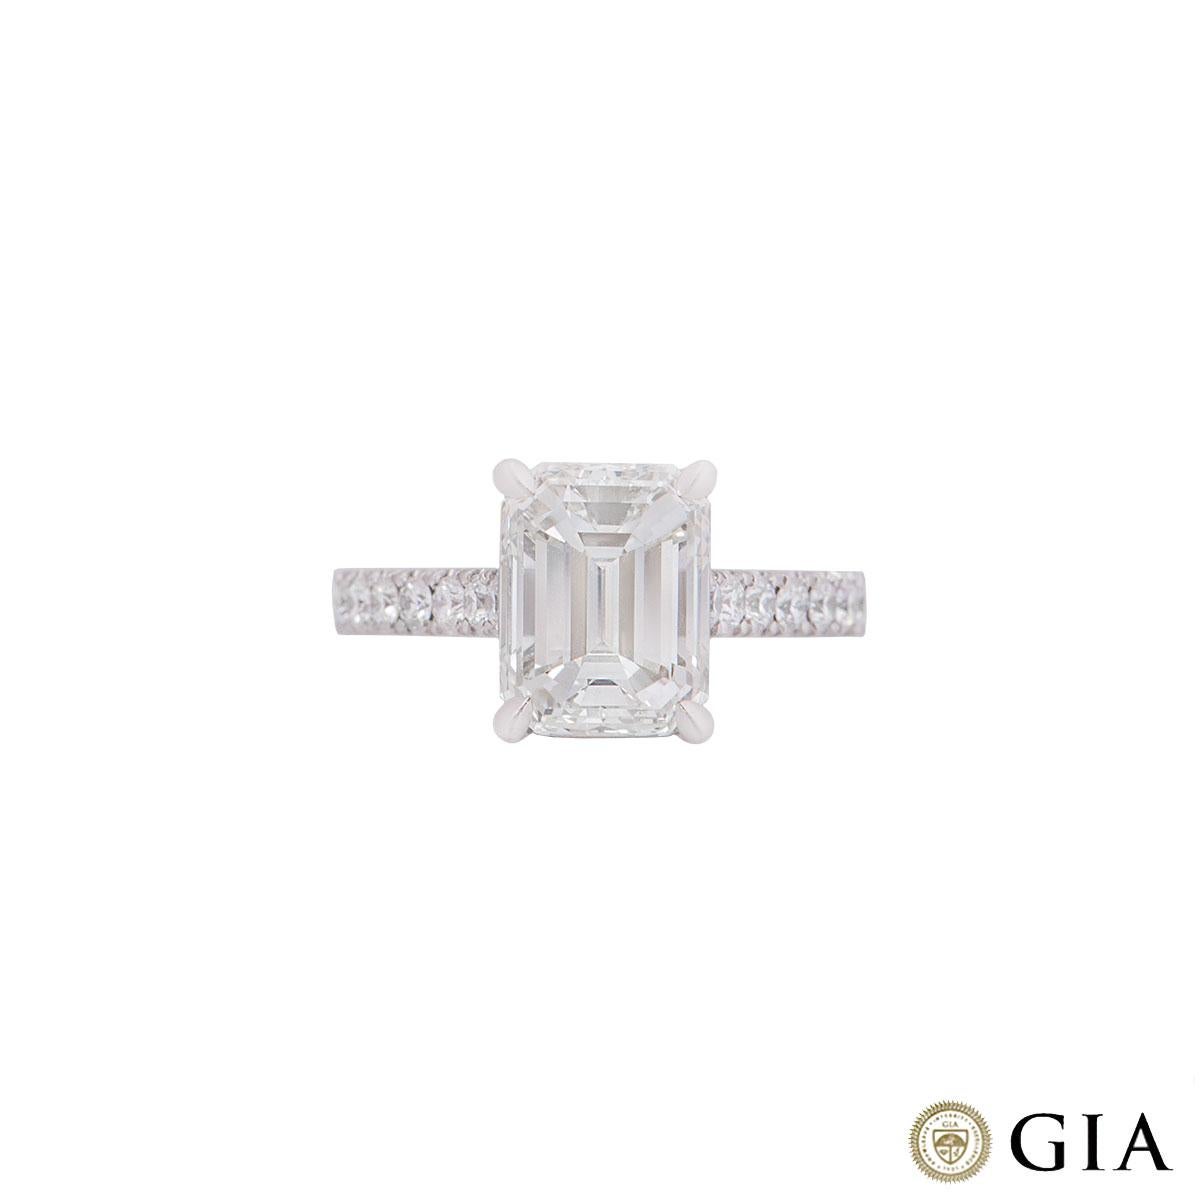 A platinum emerald cut diamond ring. The ring is set to the centre with an emerald cut diamond weighing 3.02ct, I colour and VVS1 in clarity in a four claw setting complemented by round brilliant cut diamonds on the shoulders with an approximate